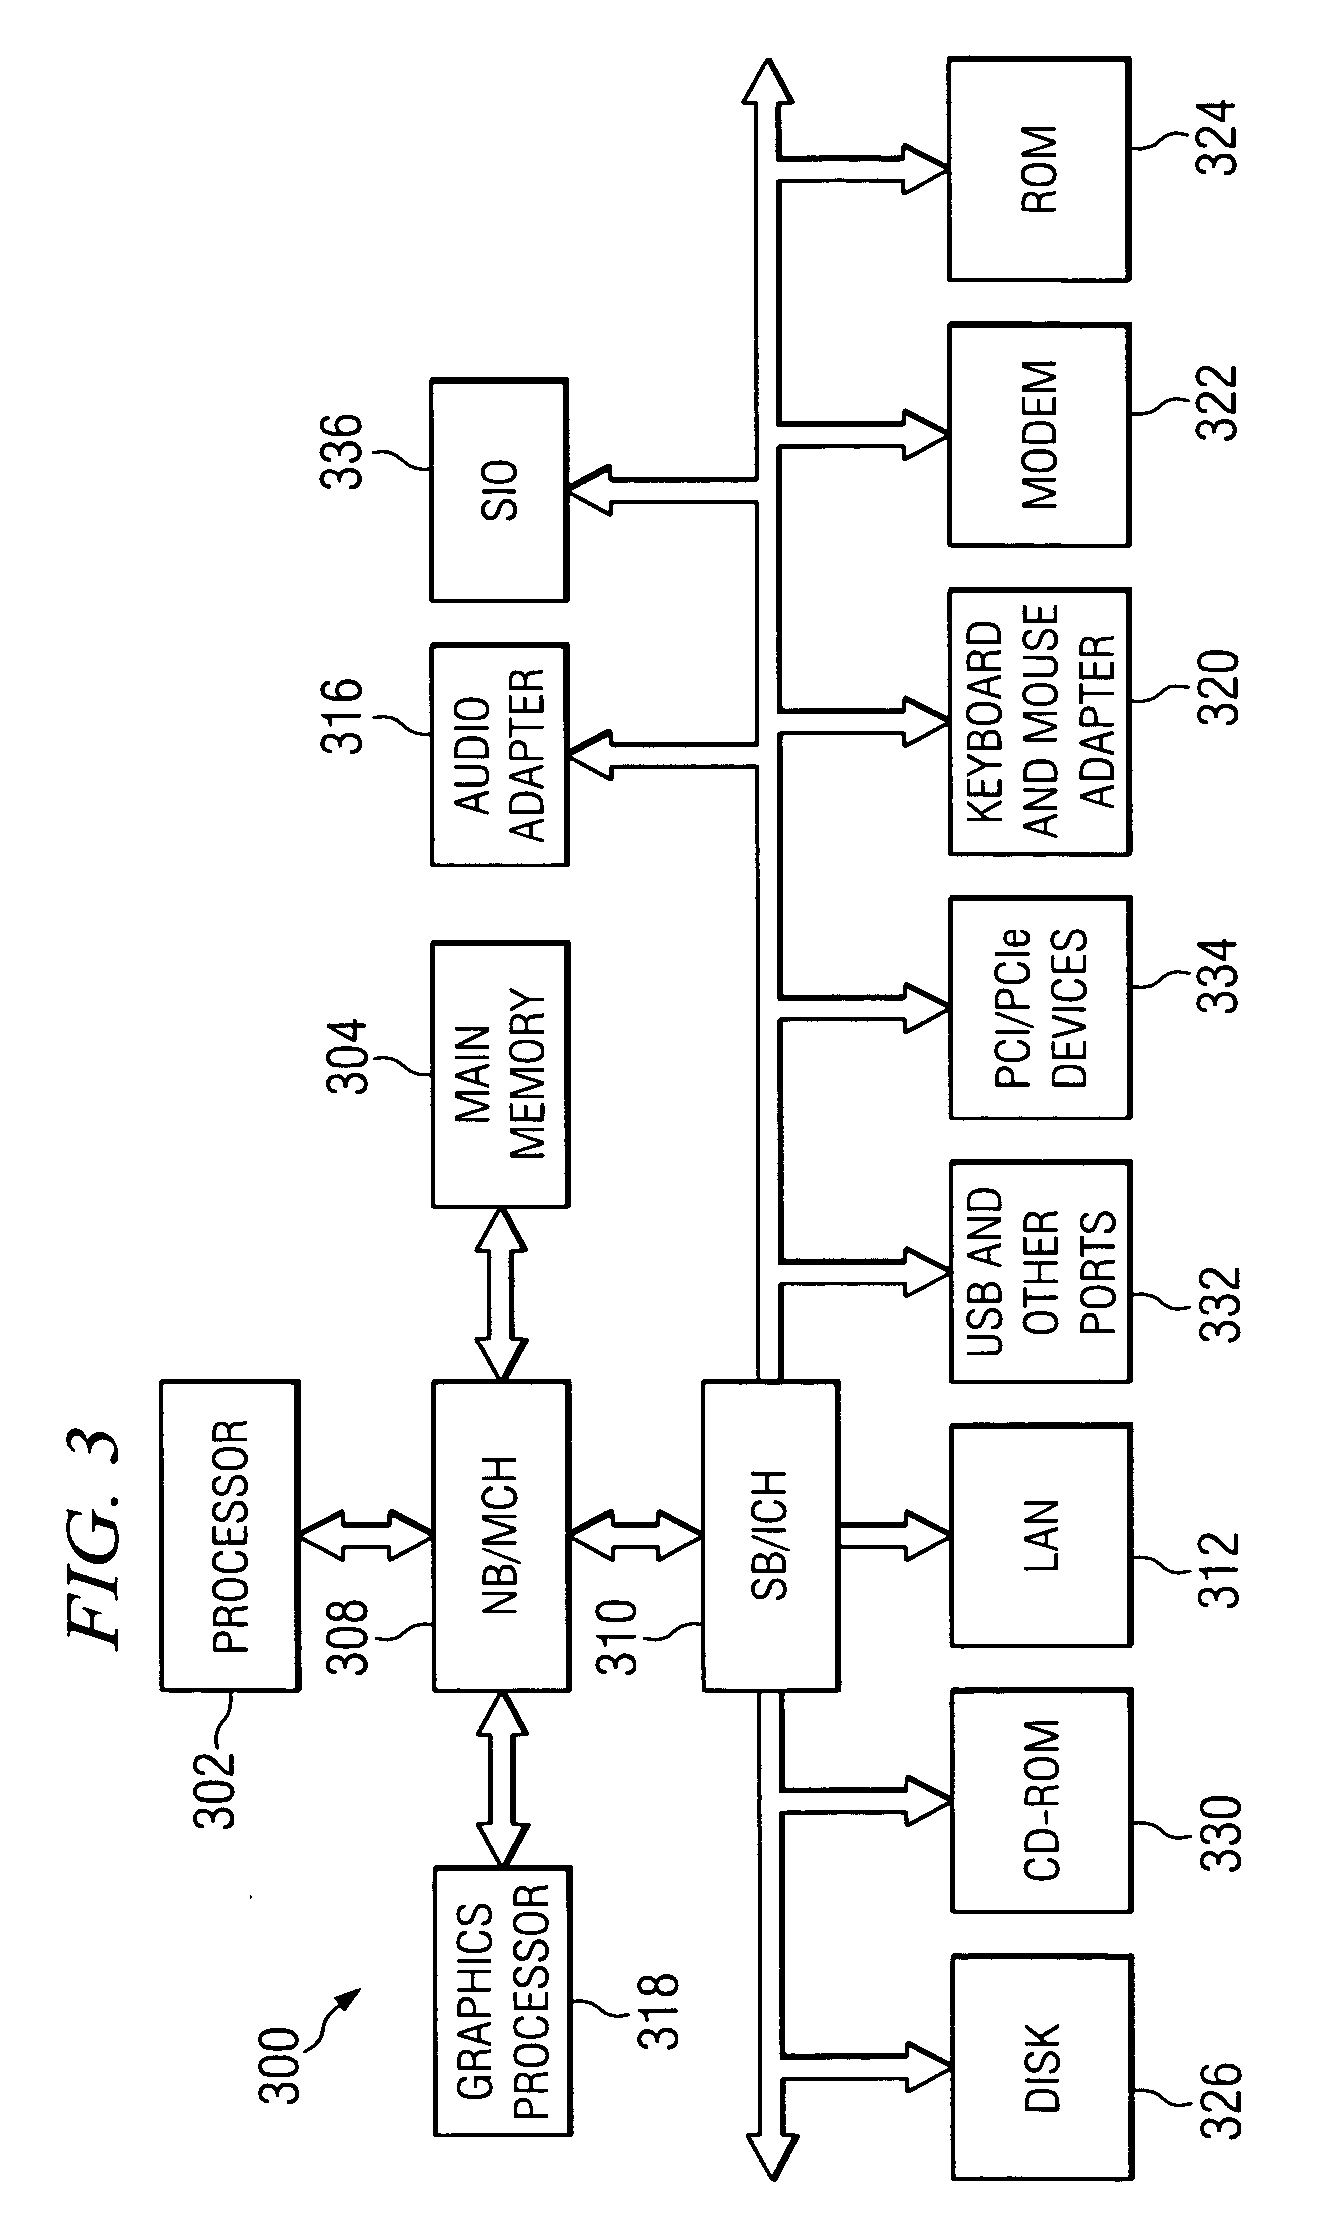 System and method for intrusion decision-making in autonomic computing environments